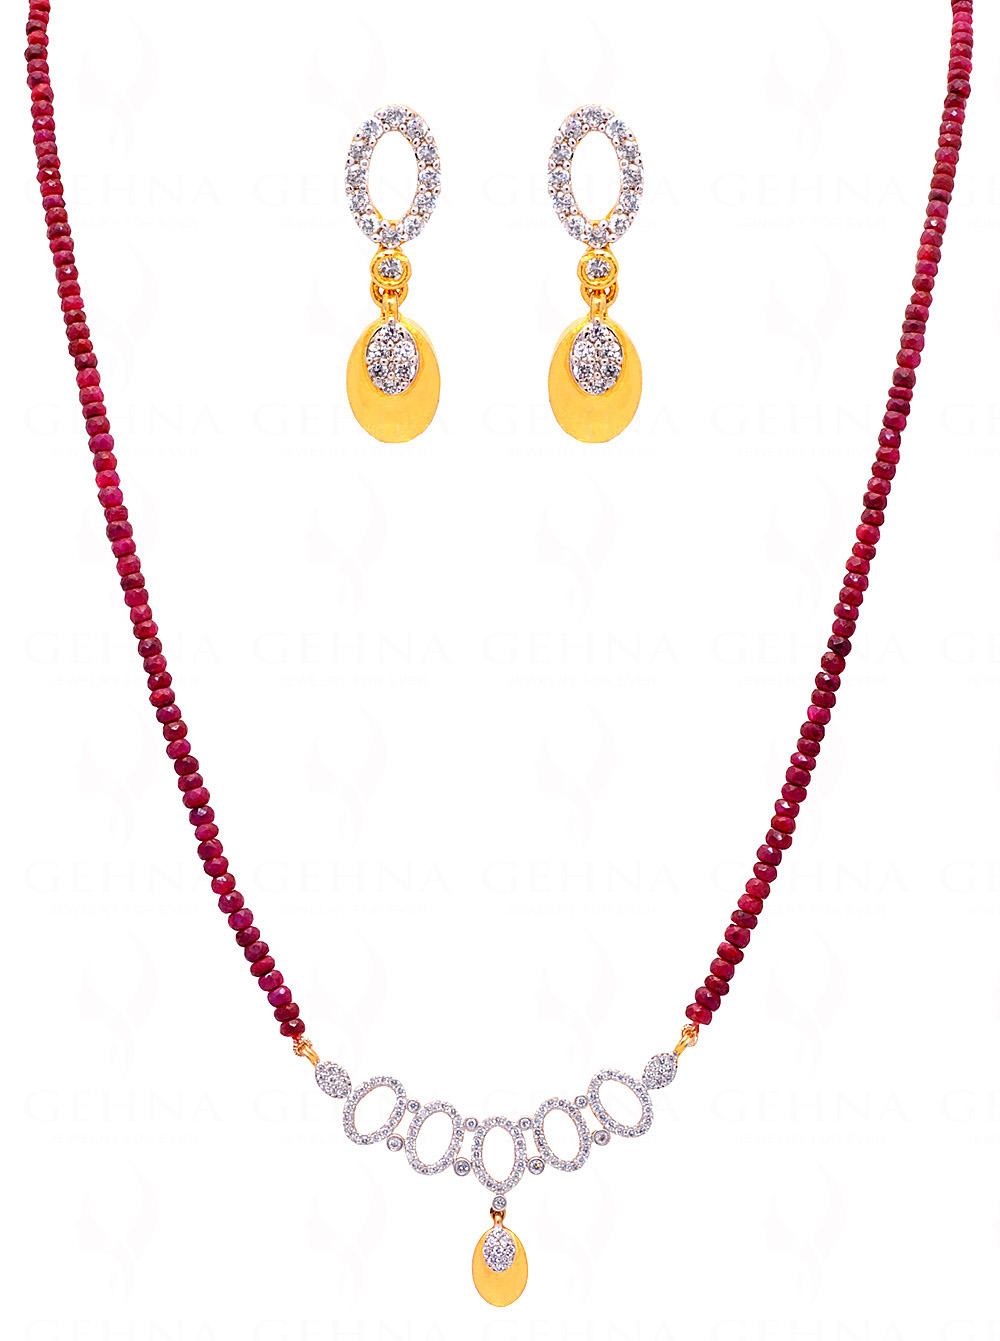 Tanmaniya Attached With Ruby Gemstone Faceted Bead NP-1173